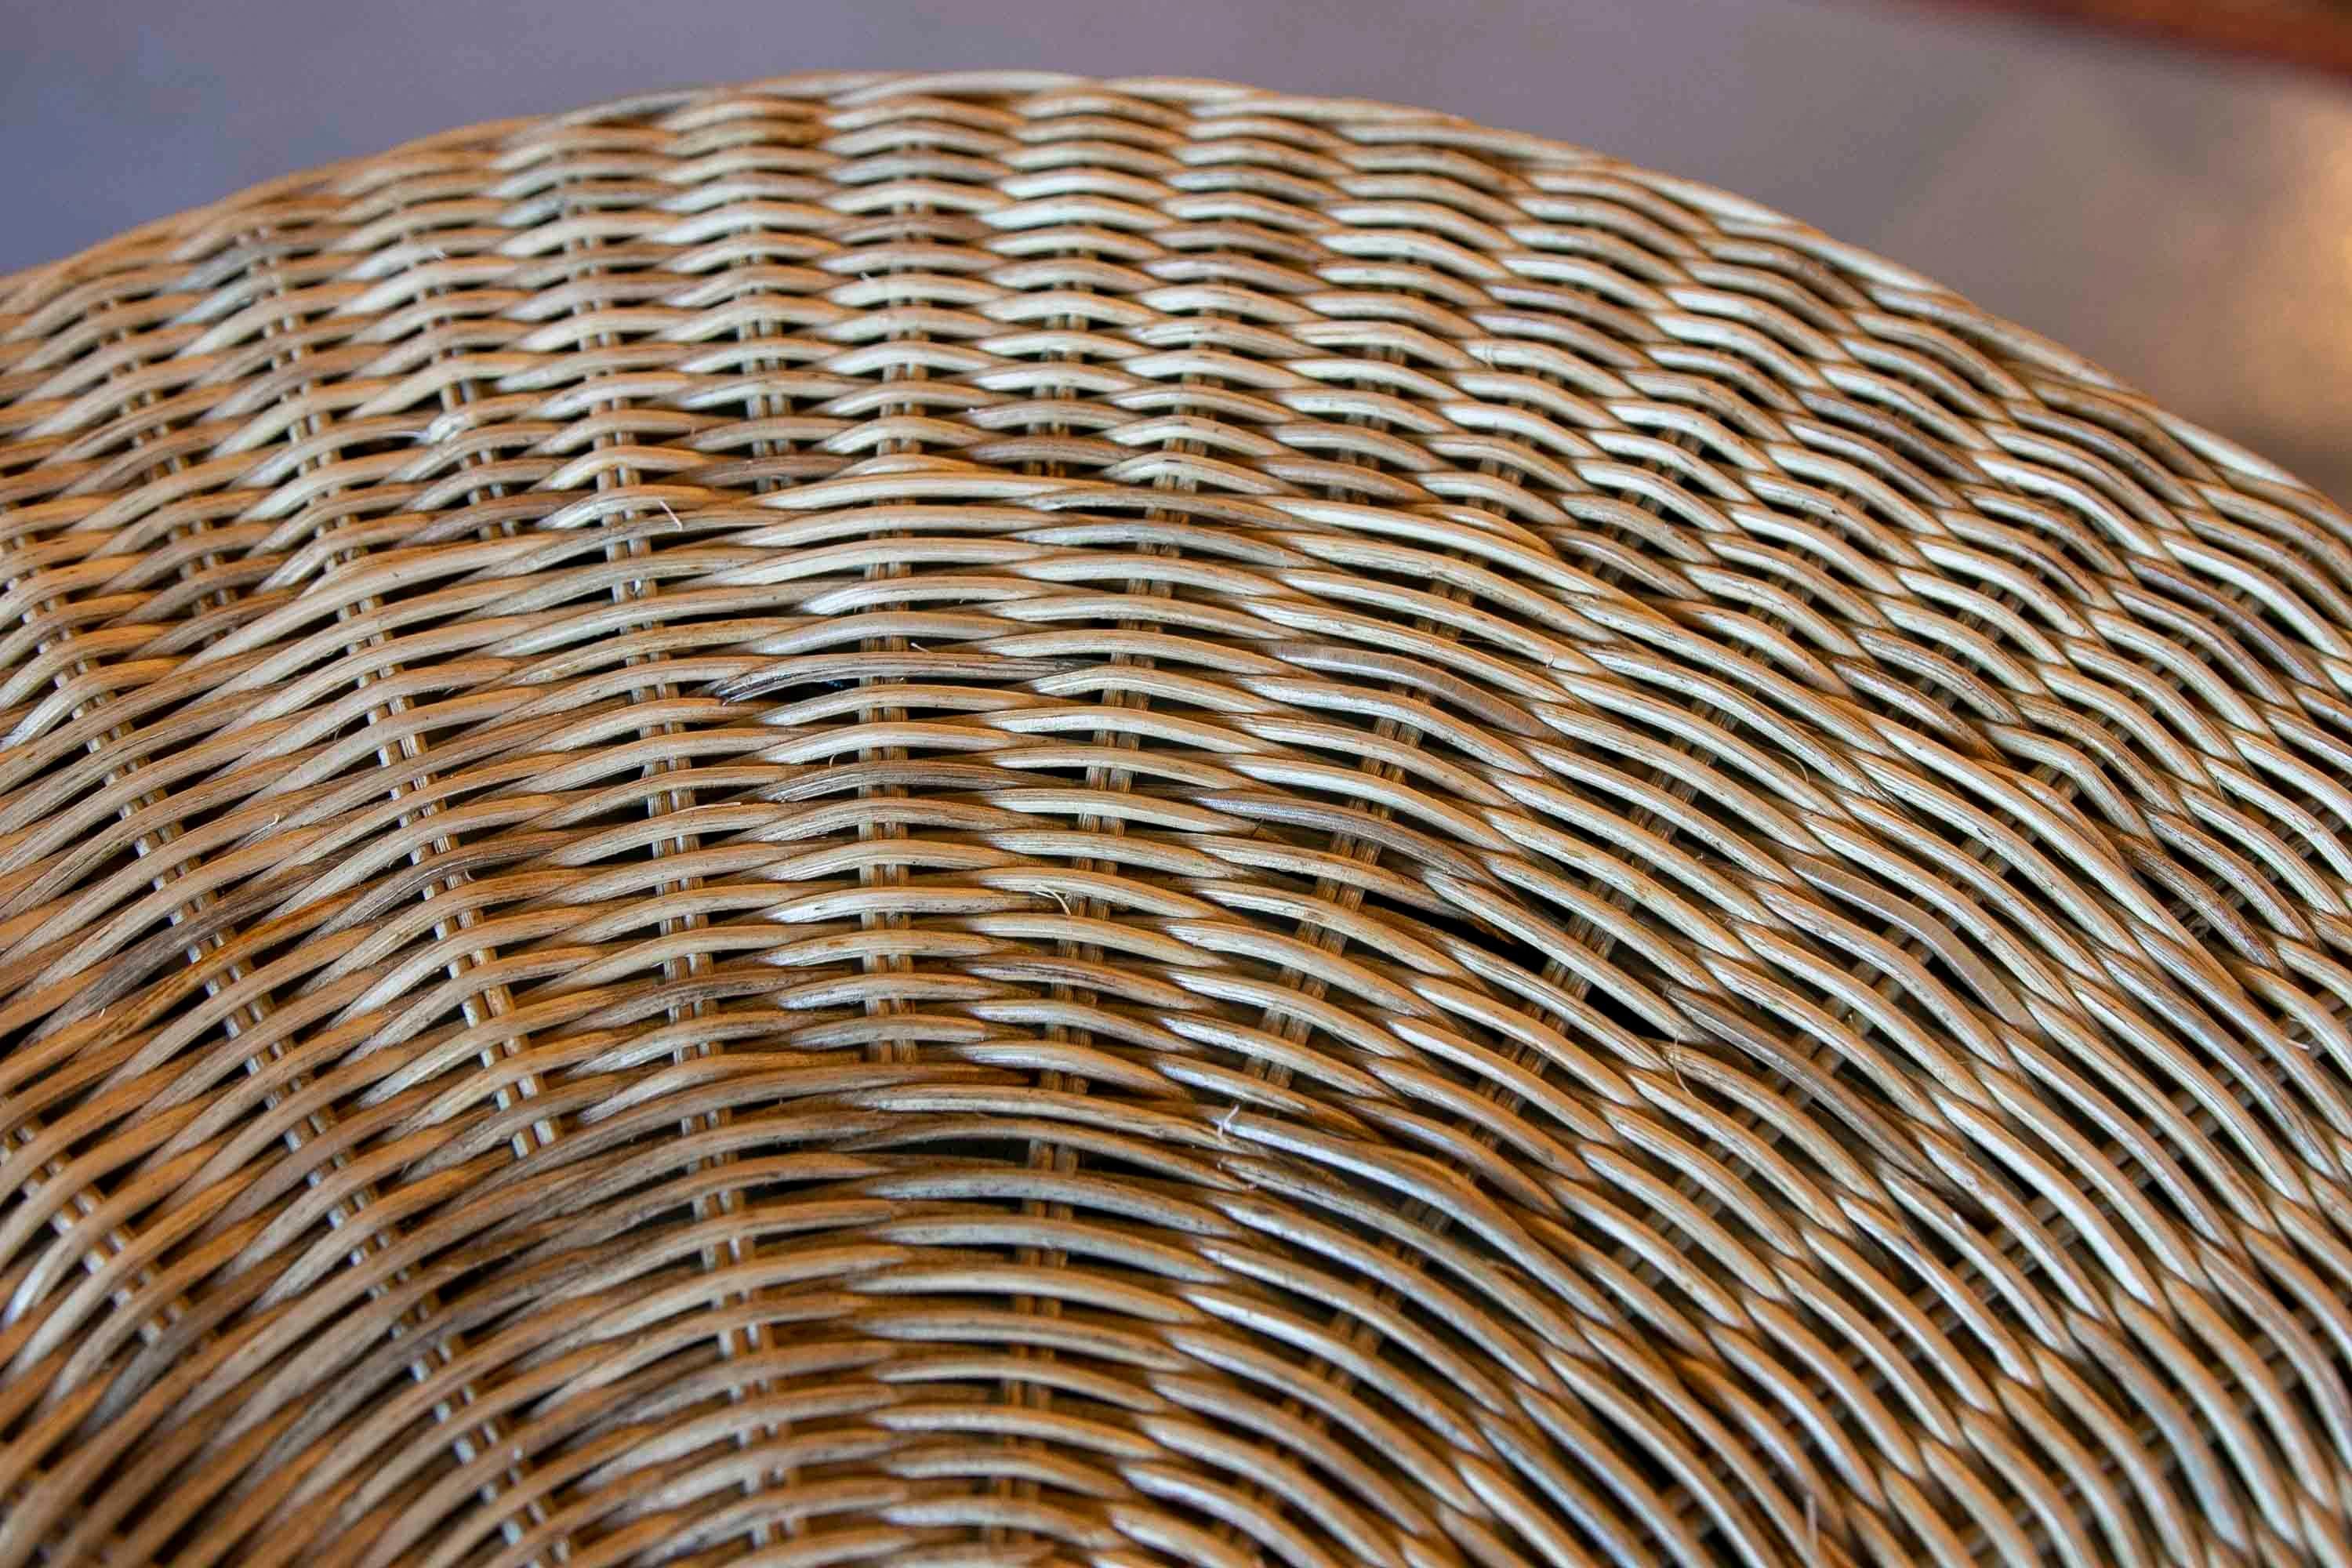 Handmade Round Wicker Side Table with Slings at the Bottom For Sale 7